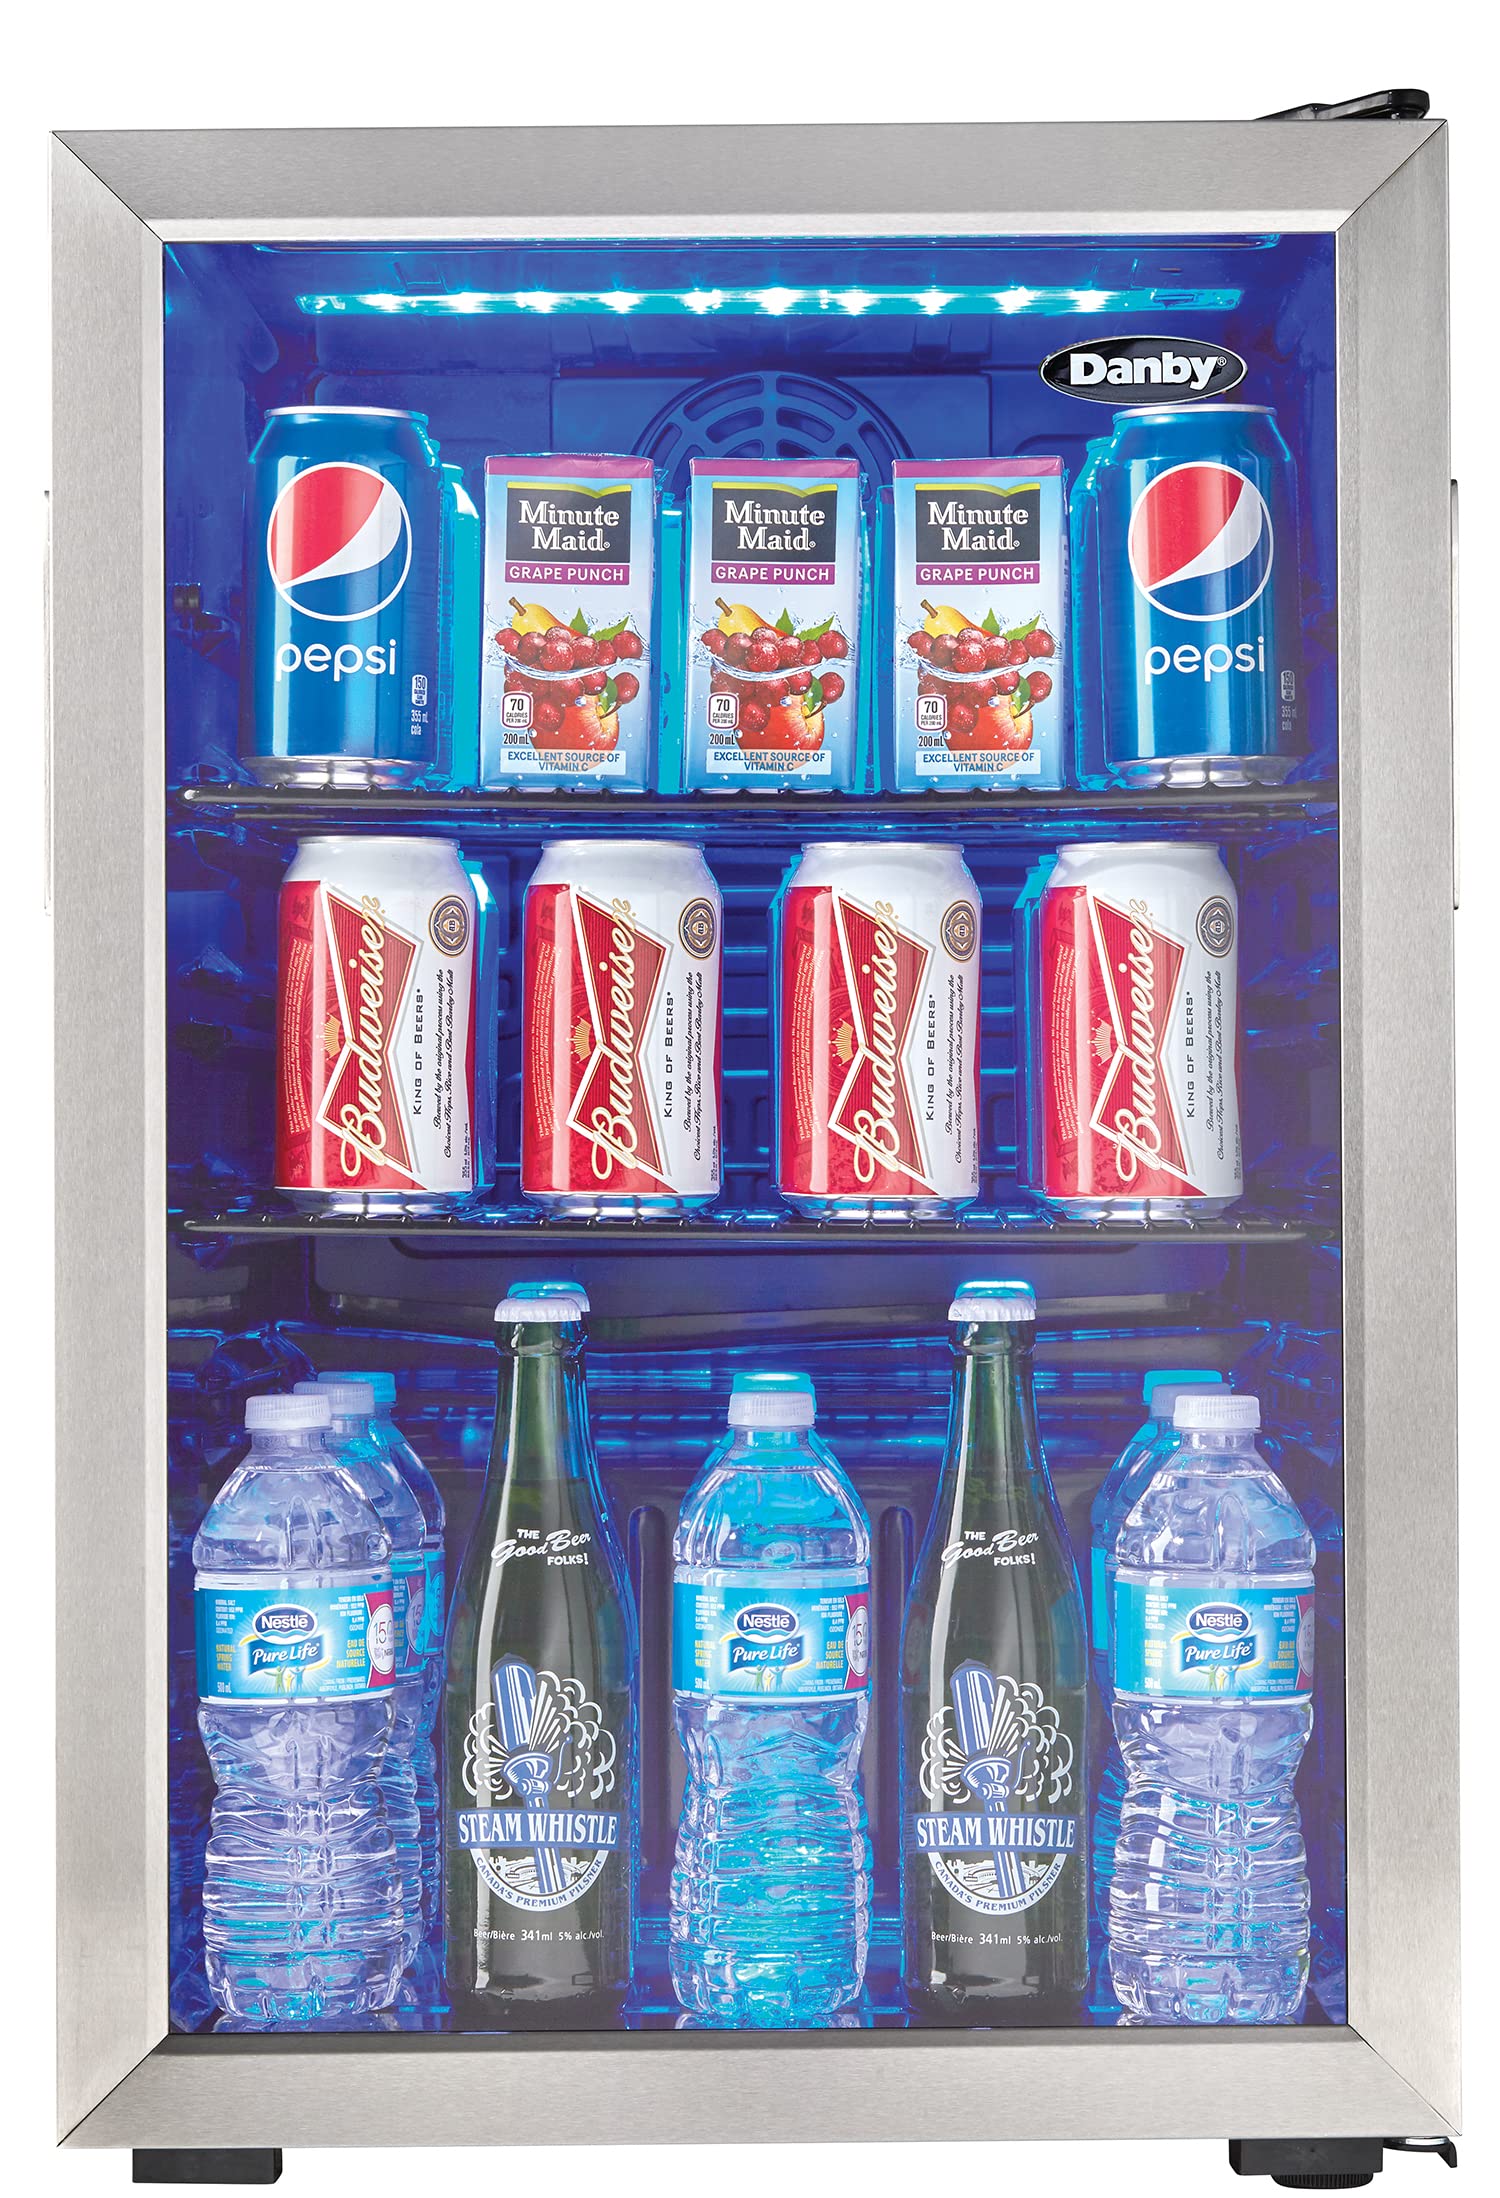 Danby 95 Can Beverage Center, 2.6 Cu.Ft Refrigerator for Basement, Dining, Living Room, Drink Cooler Perfect for Beer, Pop, Water, Black/Stainless-Steel